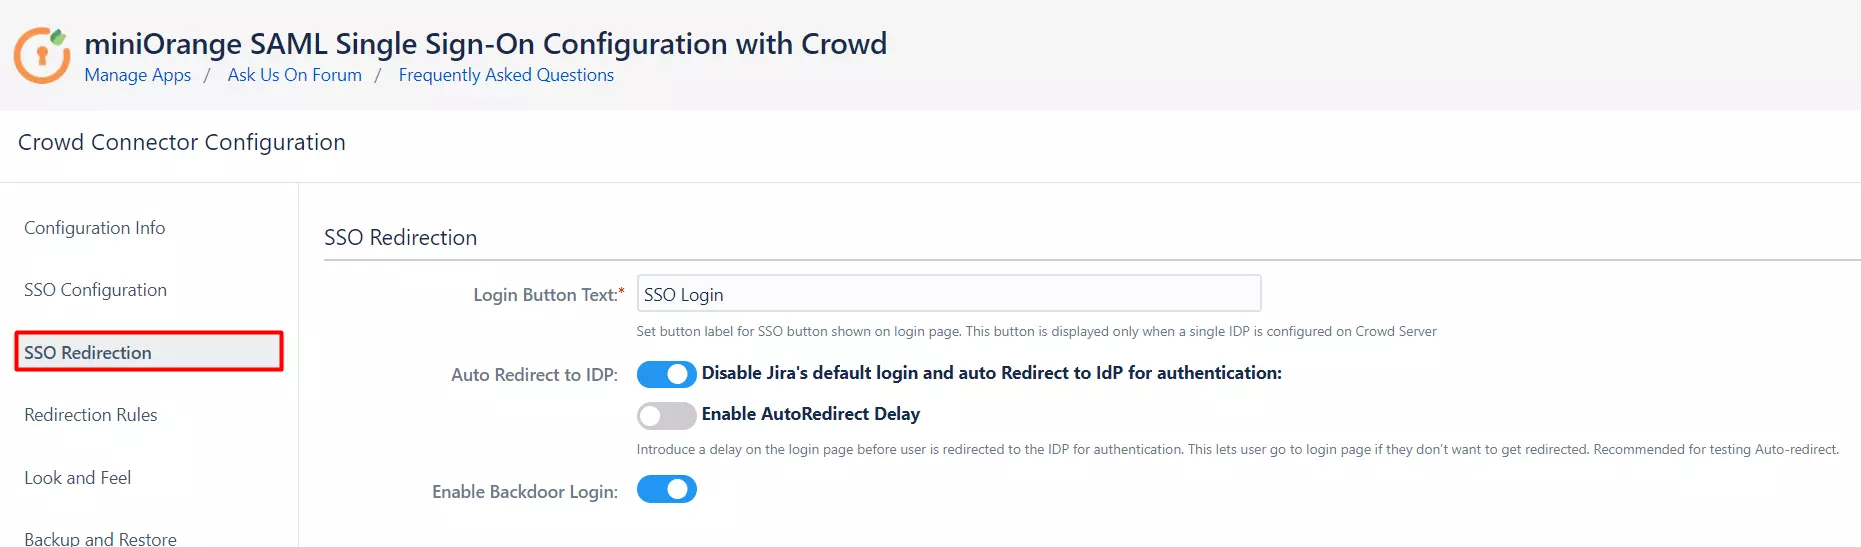 SAML Single Sign On (SSO) Connector for Crowd and Fisheye, SSO Redirection